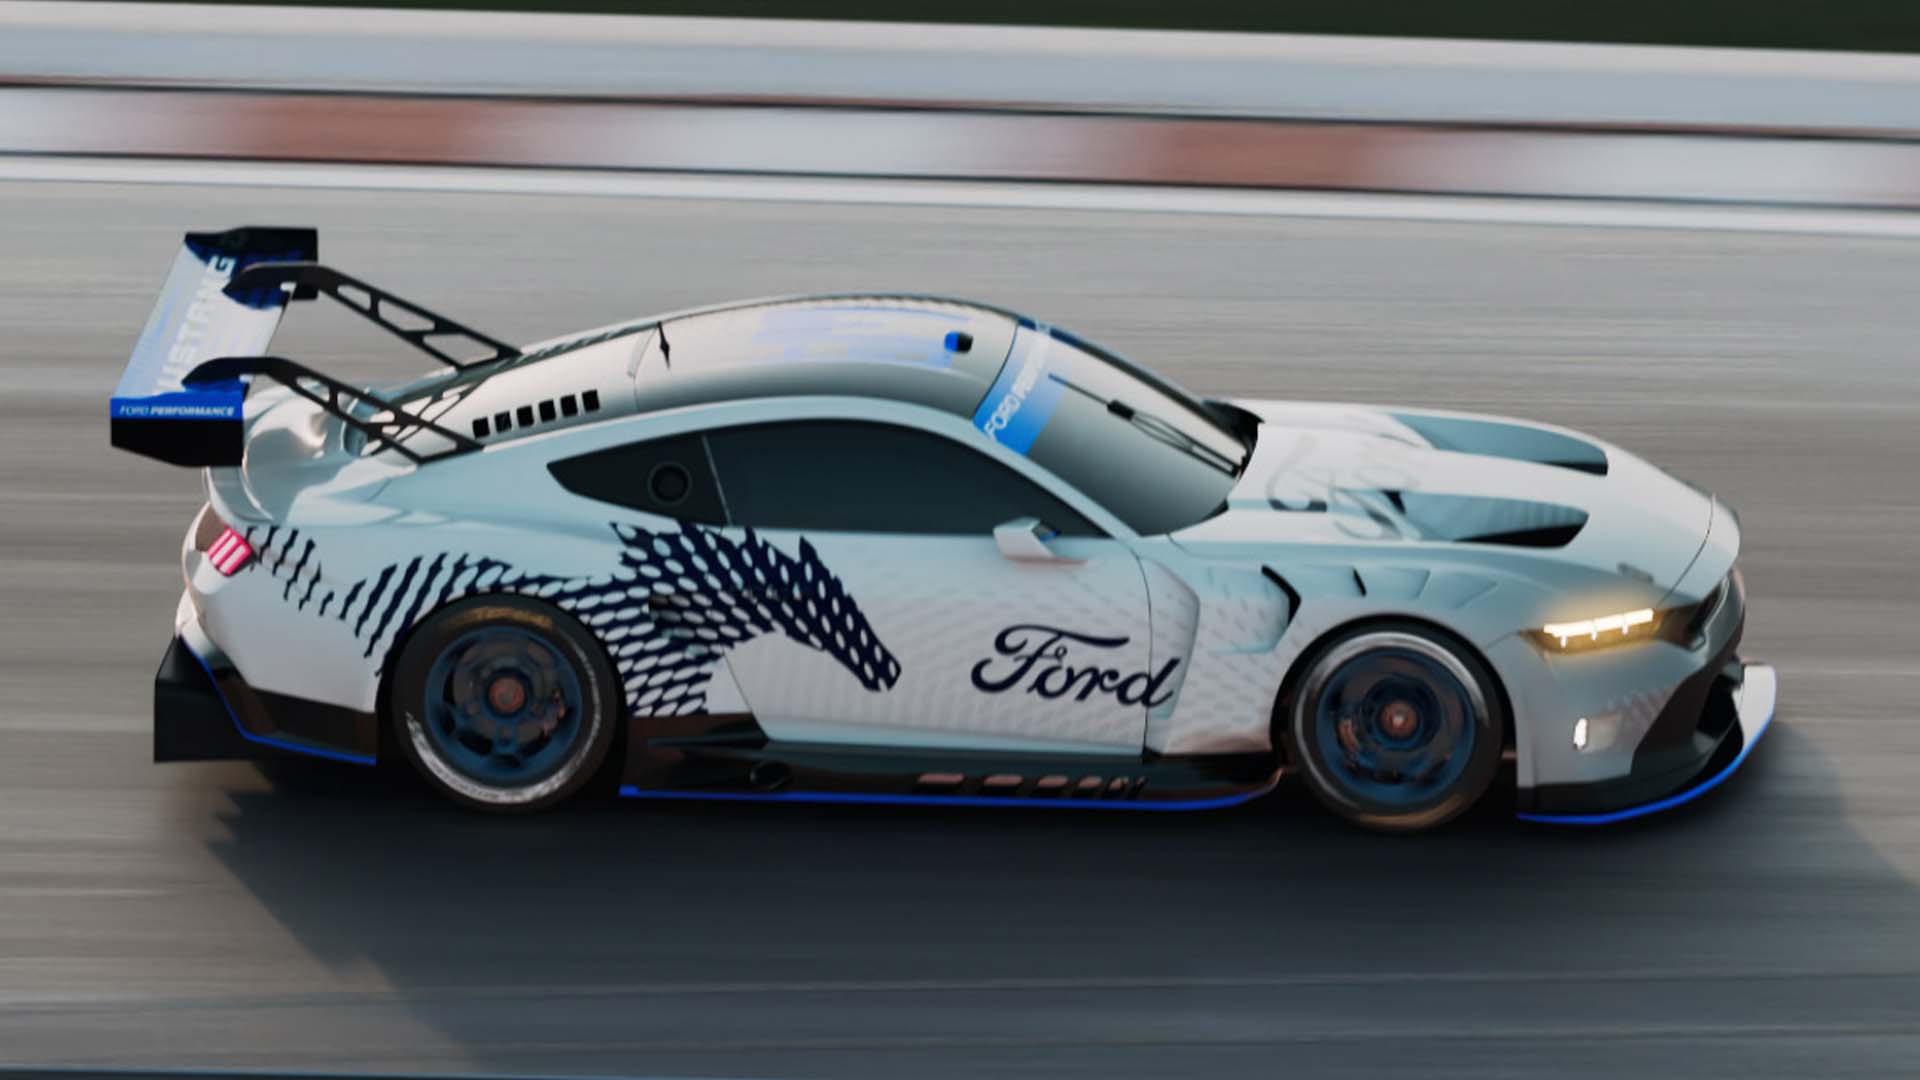 Brullen schedel Bewolkt Here's the 2024 Ford Mustang Race Car That Will Race at Le Mans